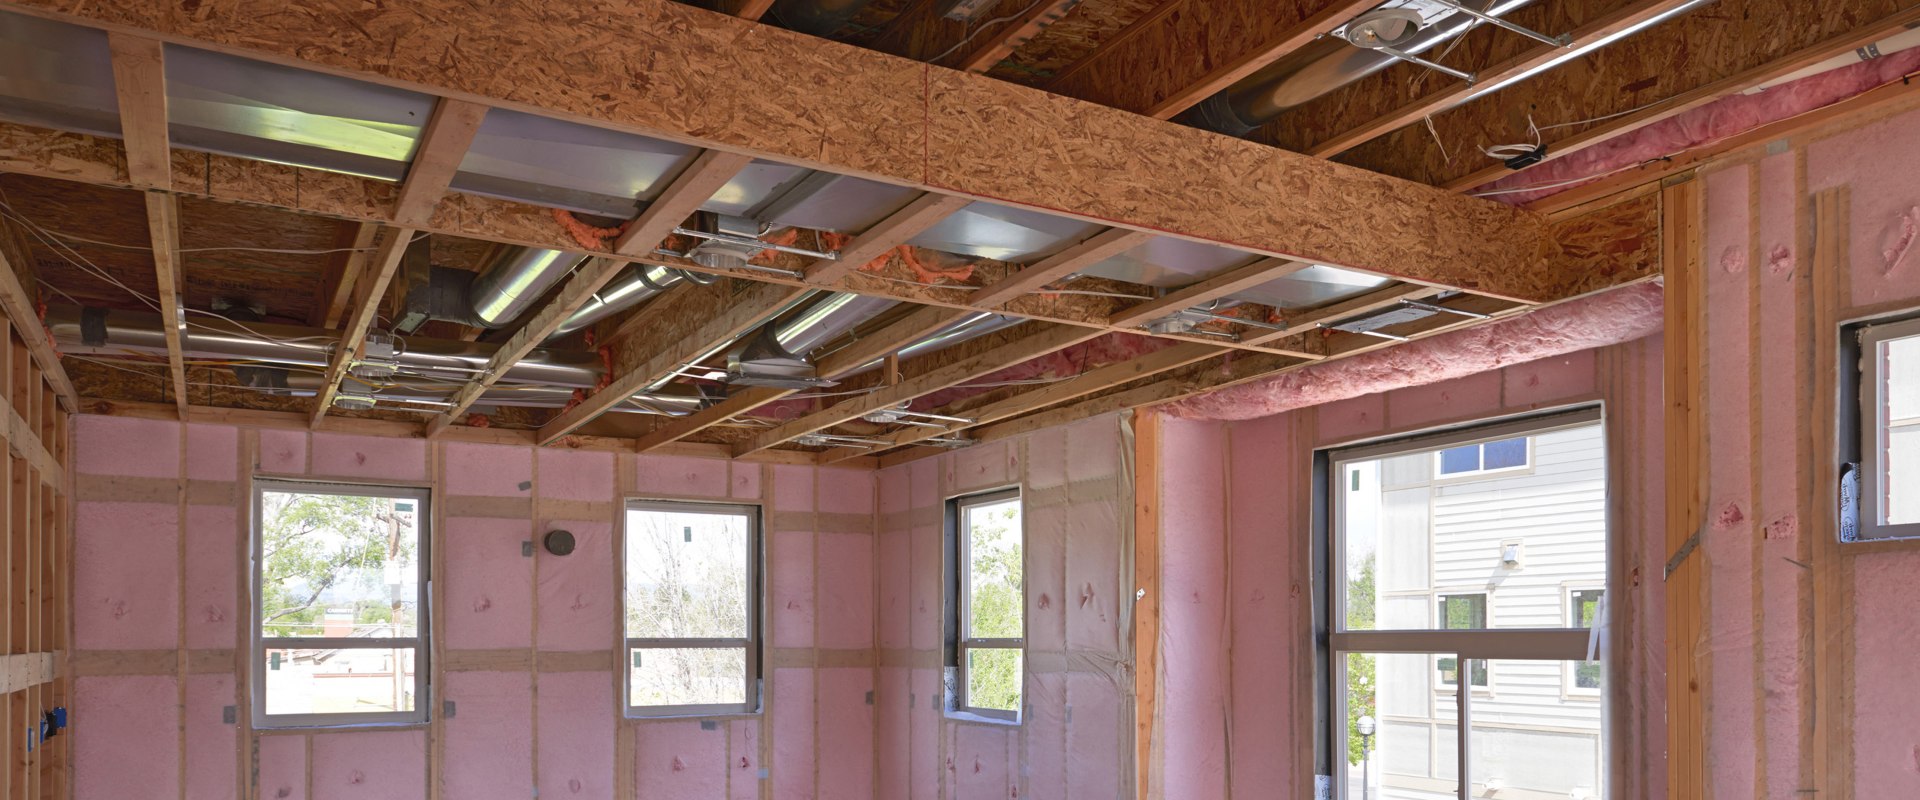 Insulating Ductwork Between Floors: What You Need to Know